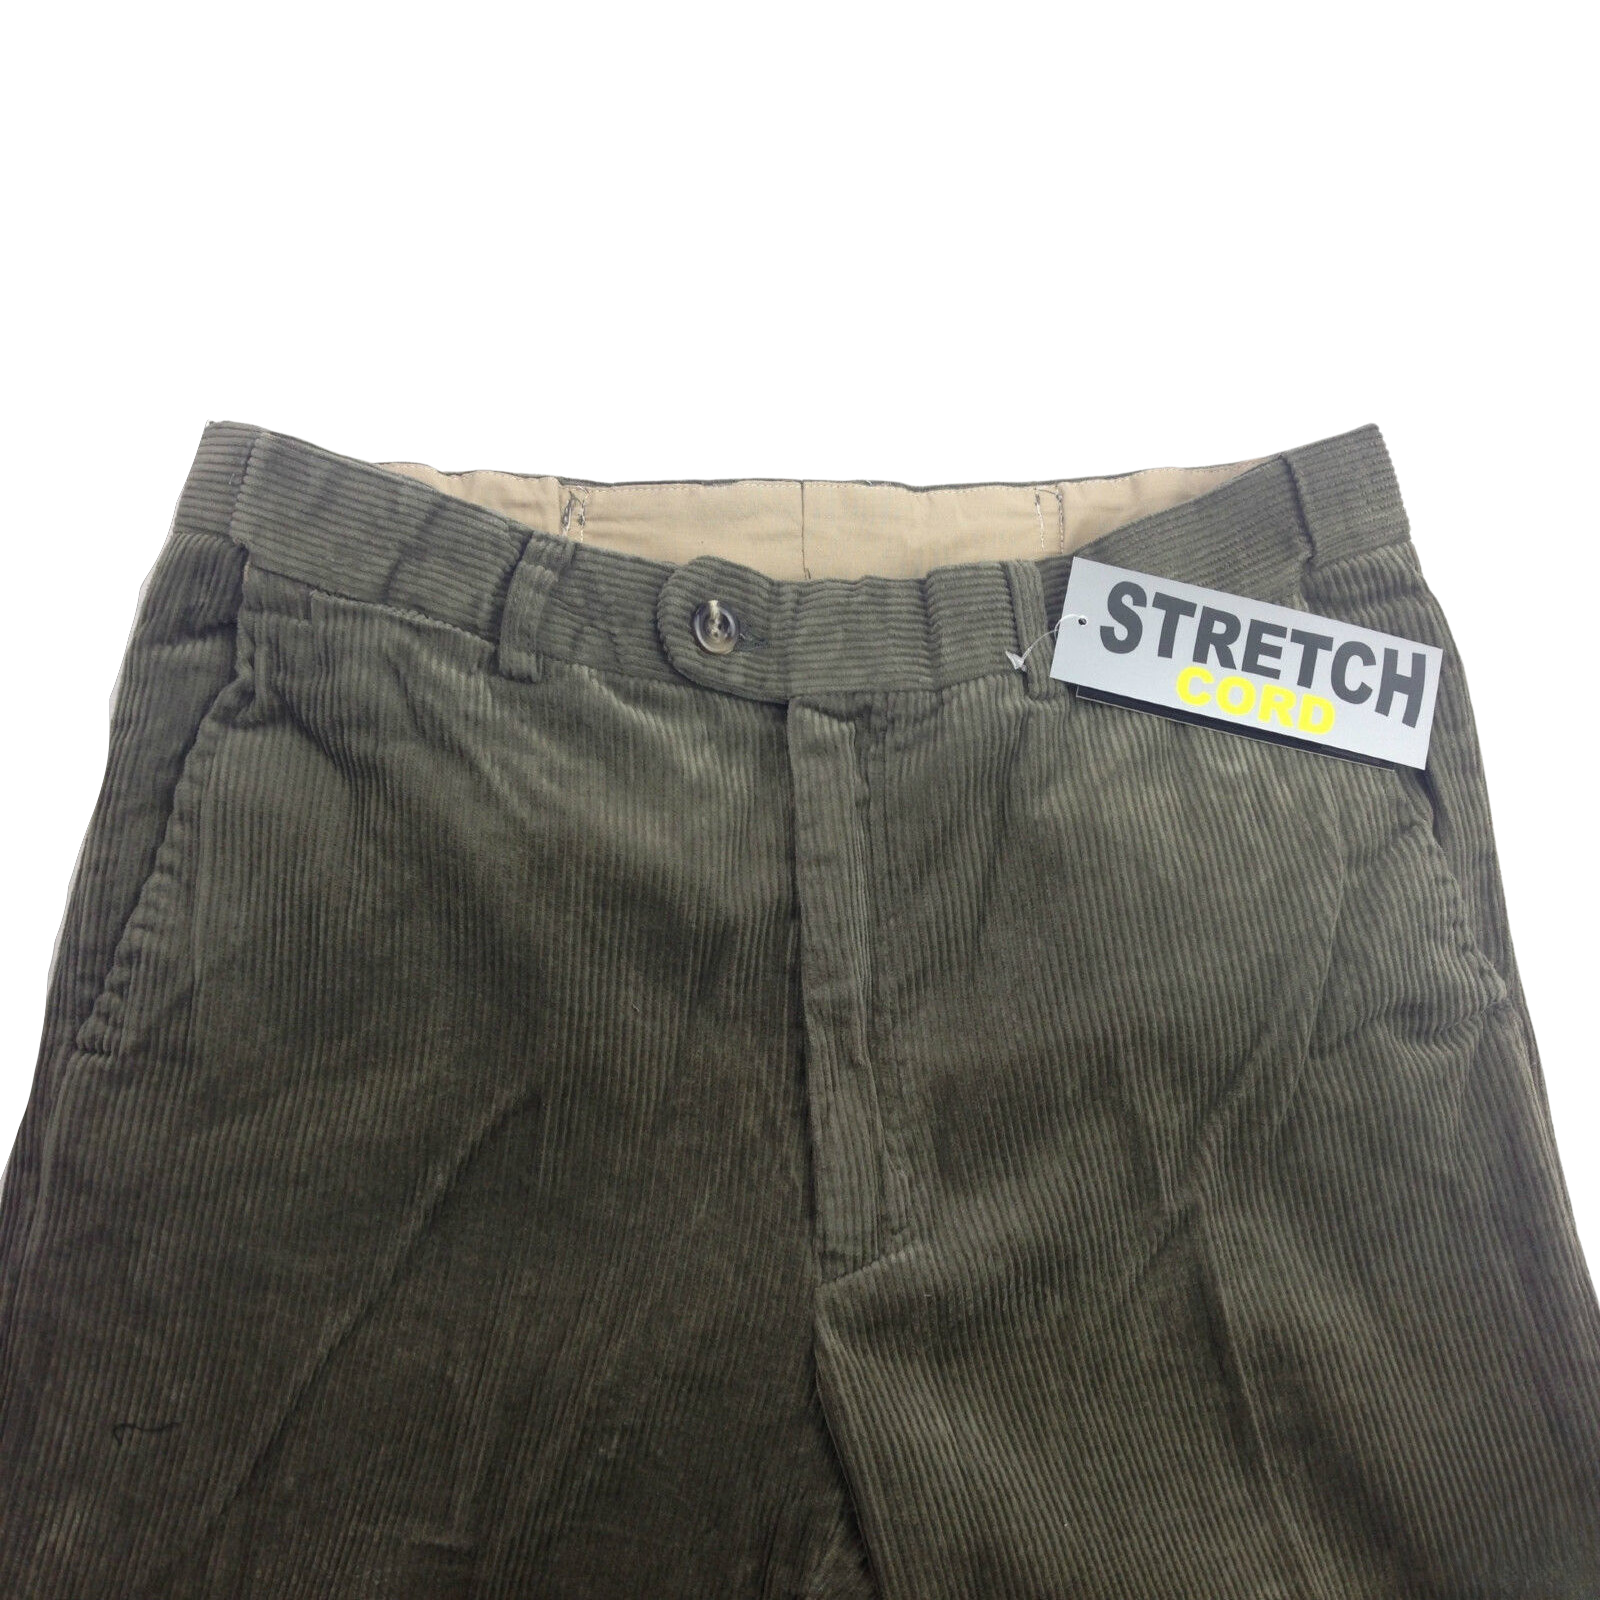 MENS CORDUROY PANTS Trousers Cords Casual STRETCH COTTON Size 32""-44"" Adjustable - Olive (89) - 87 (34"")